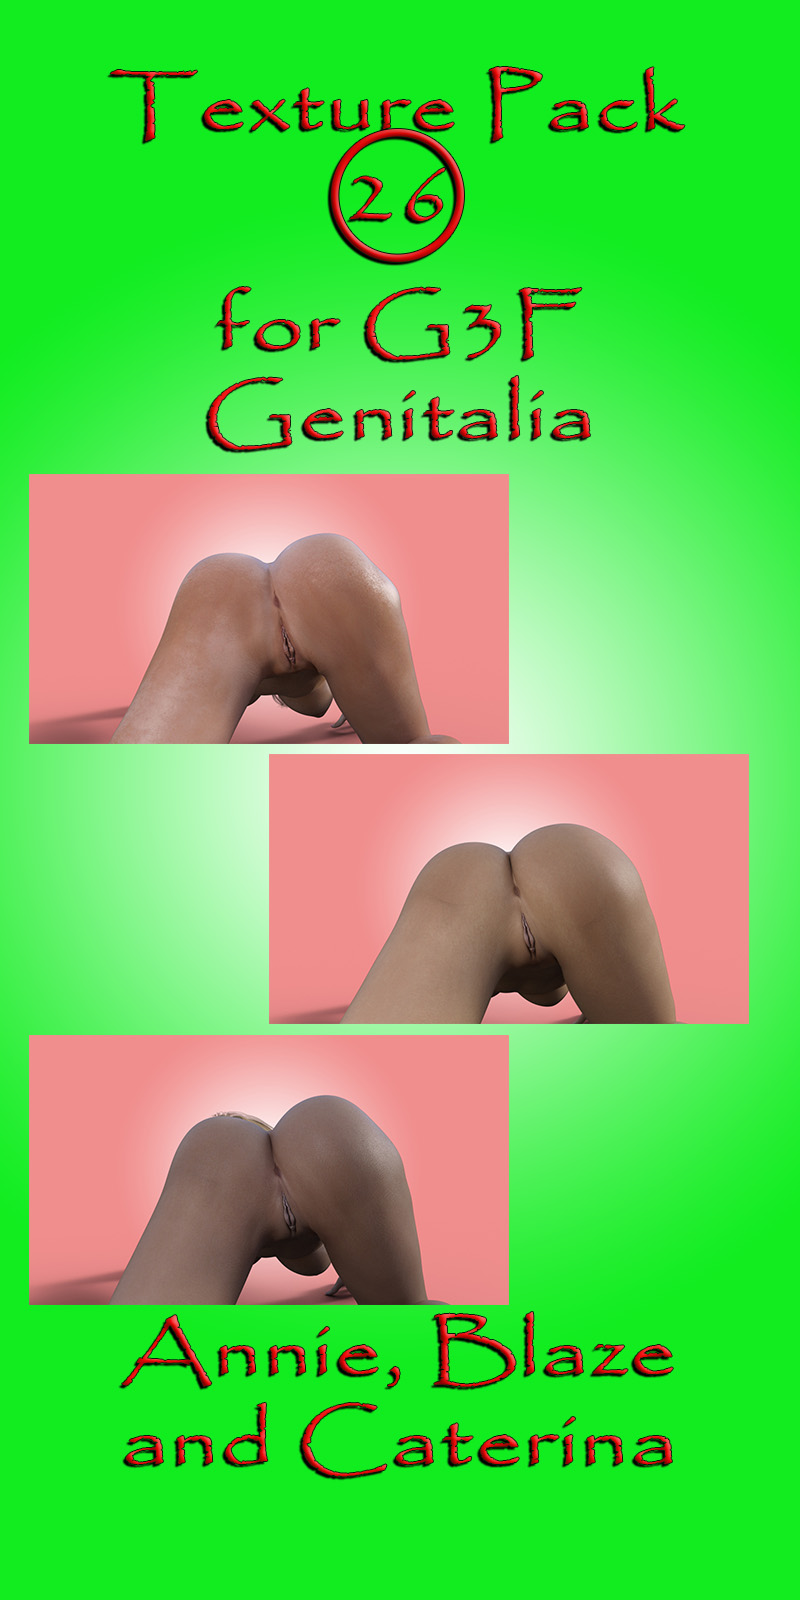 Iray Texture Pack 26 For G3F Genitalia